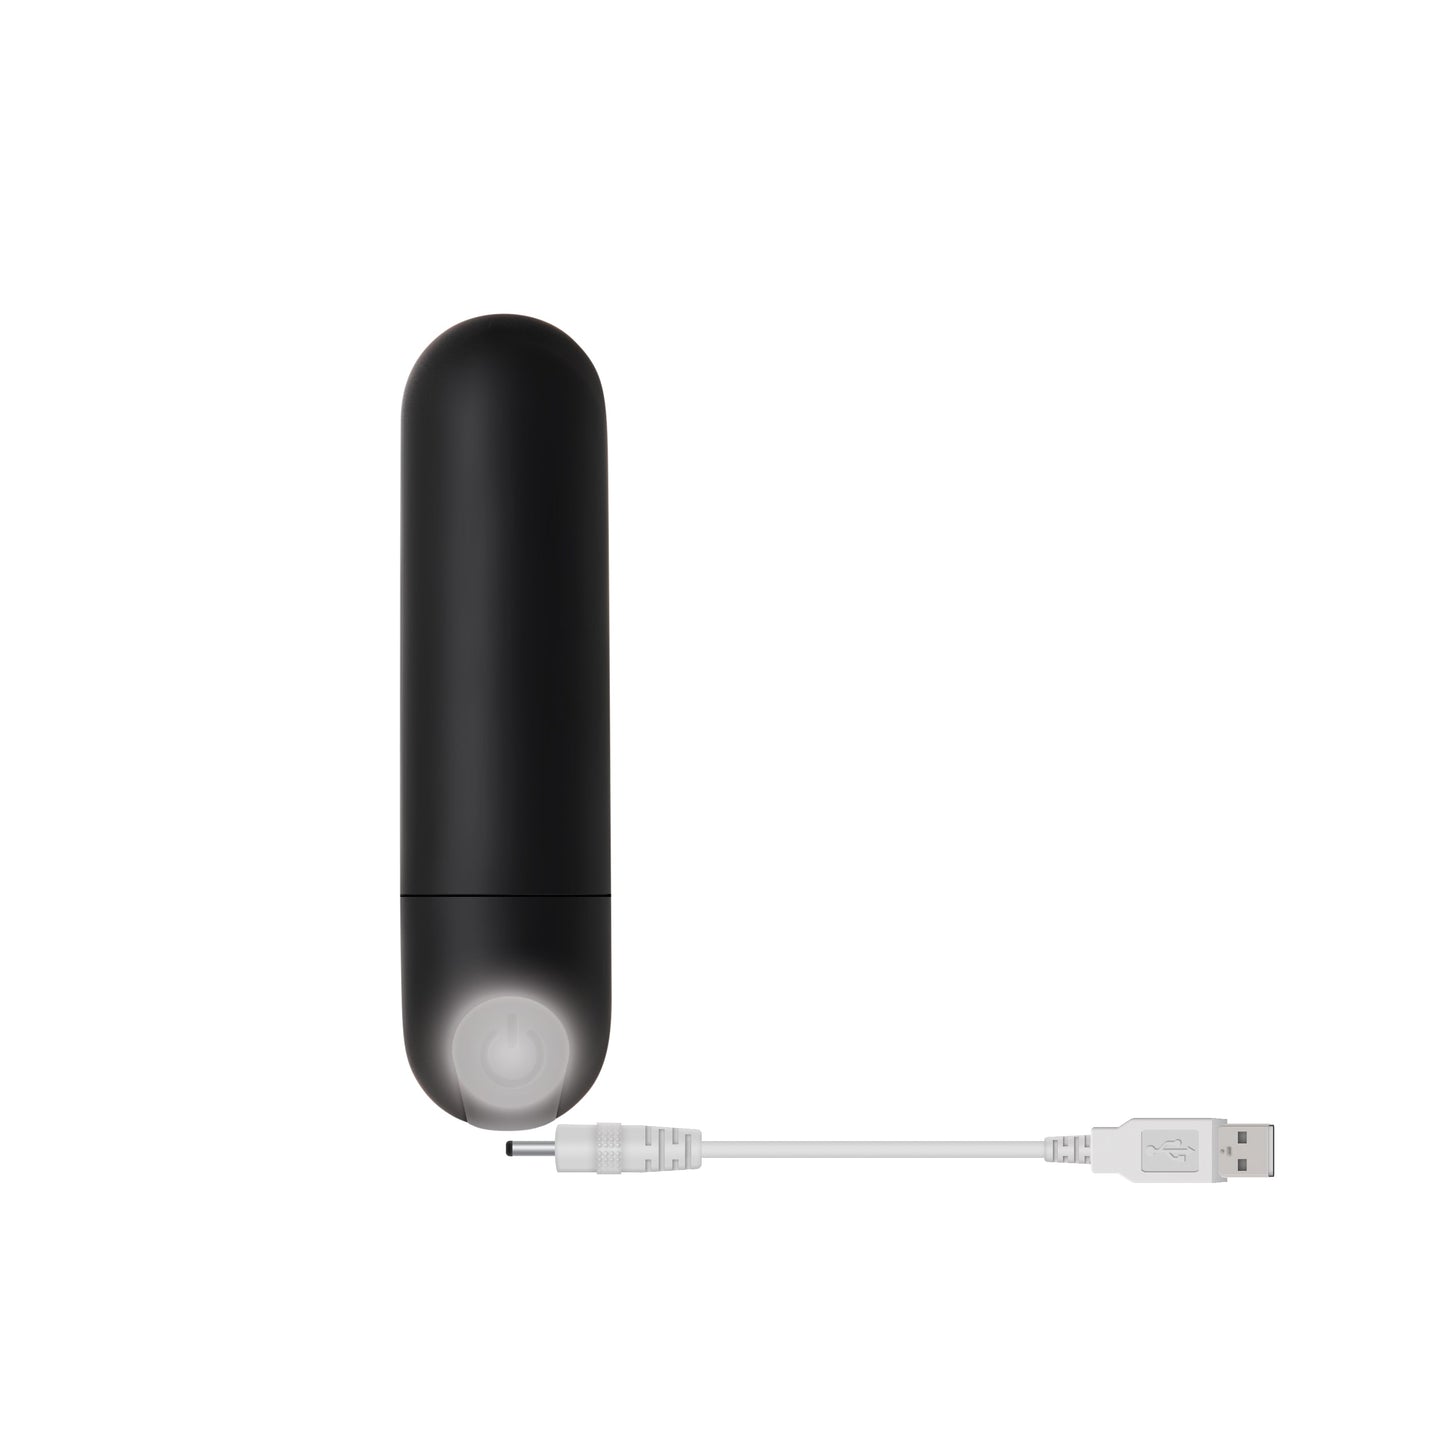 Zero Tolerance Silicone Rechargeable Eternal P-Spot - Black - Thorn & Feather Sex Toy Canada